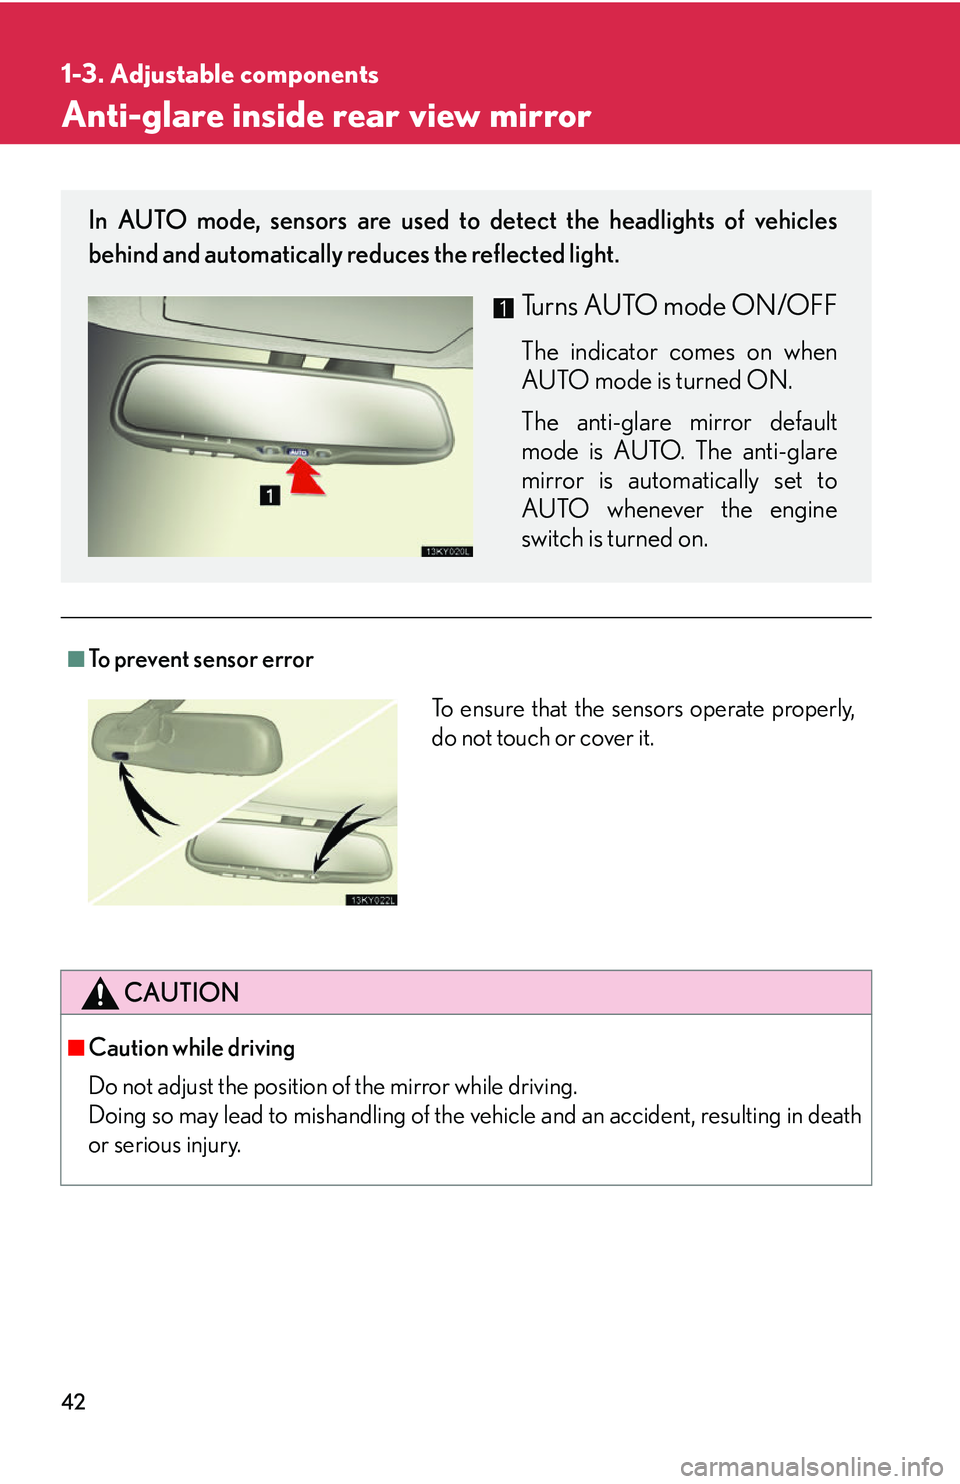 Lexus IS350 2006  Scheduled Maintenance Guide / LEXUS 2006 IS350/250 FROM MAY 2006 PROD.  (OM53619U) User Guide 42
1-3. Adjustable components
Anti-glare inside rear view mirror
■To prevent sensor error
CAUTION
■Caution while driving
Do not adjust the position of the mirror while driving.
Doing so may lead t